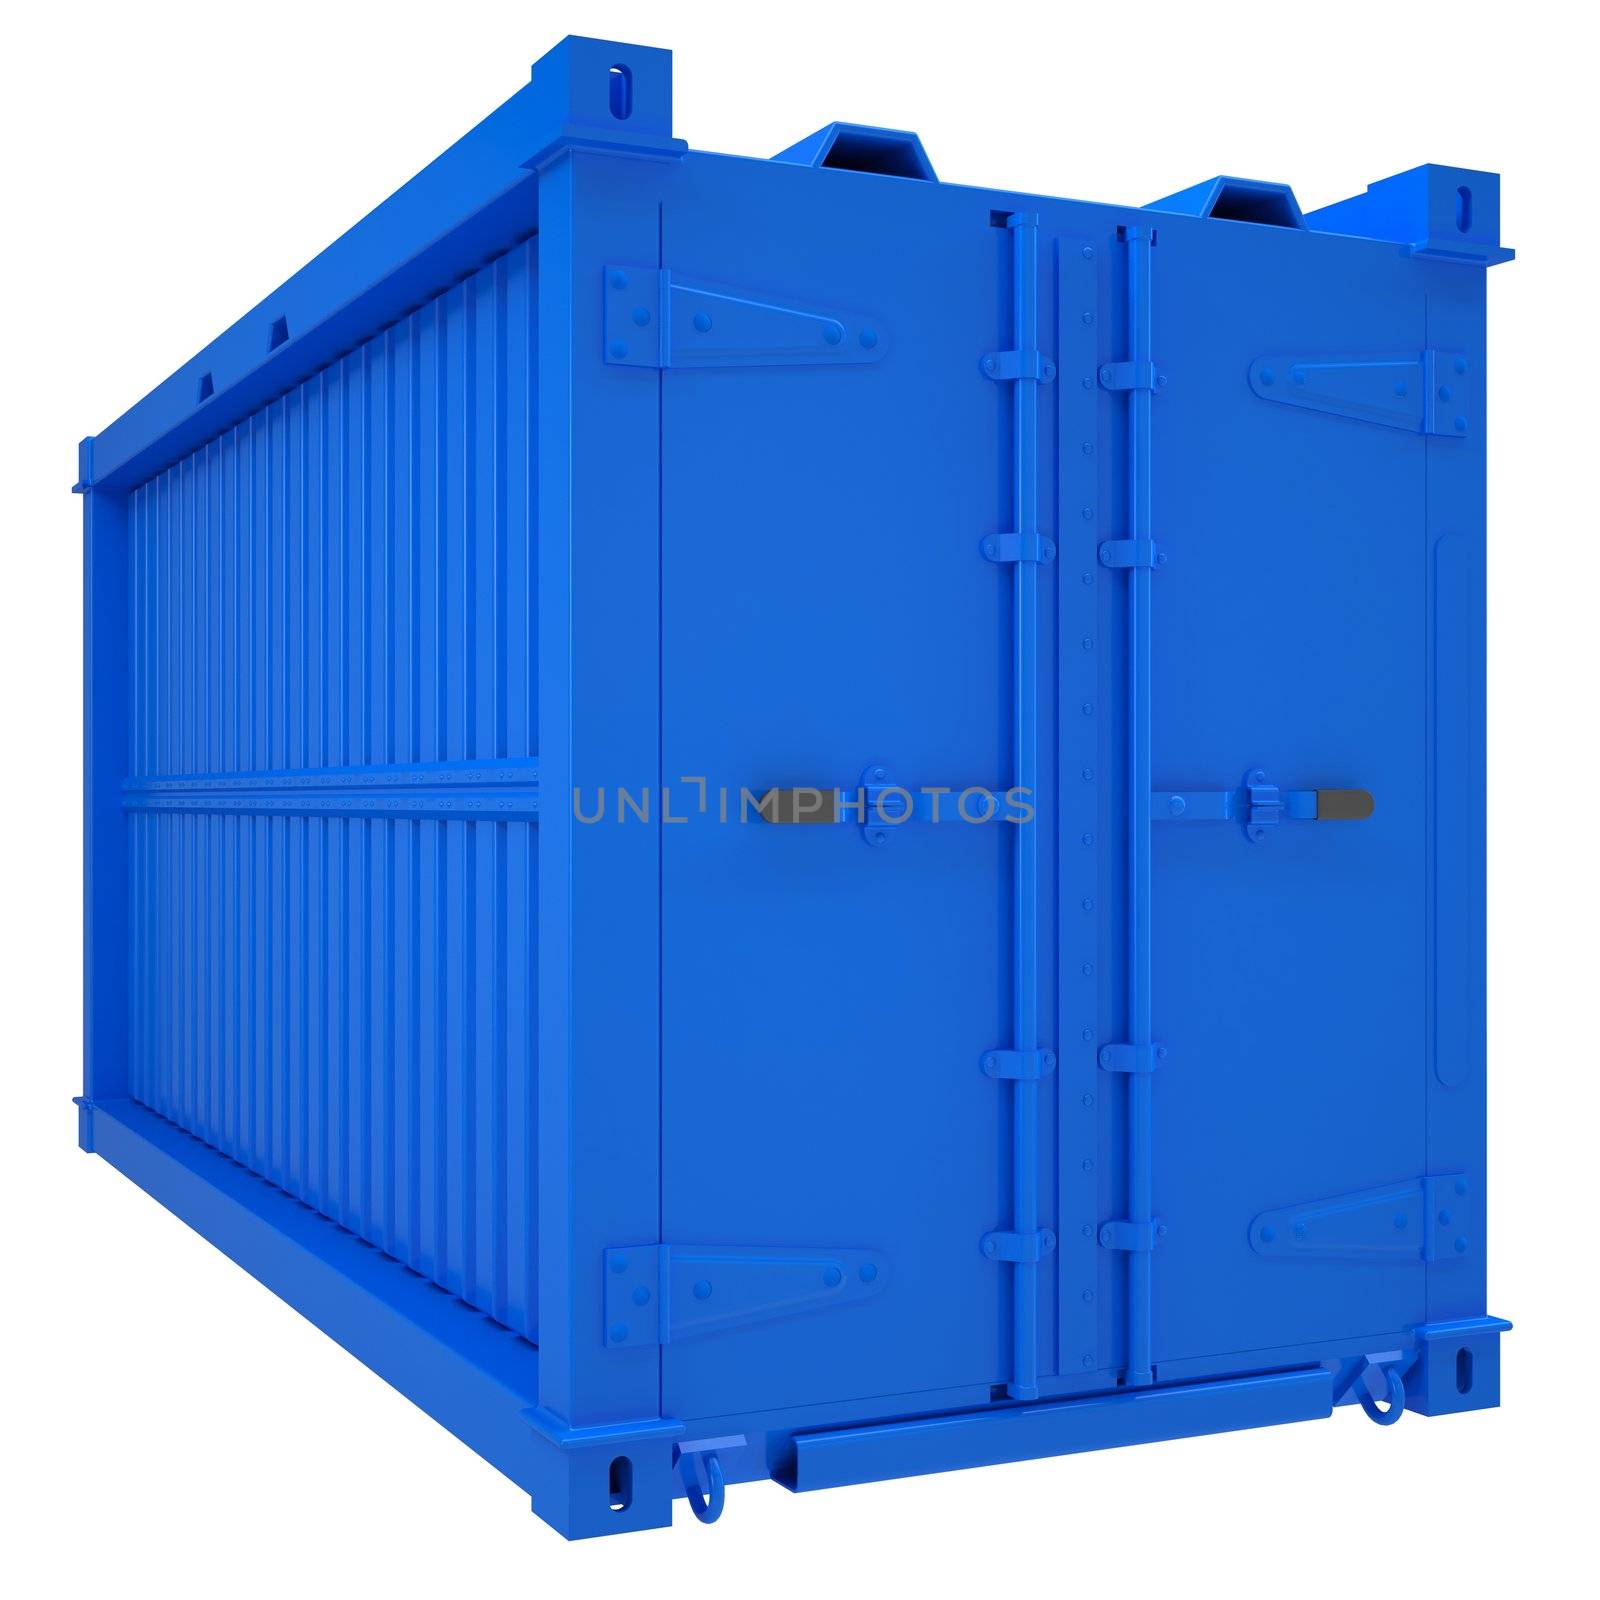 Blue container. Isolated render on a white background